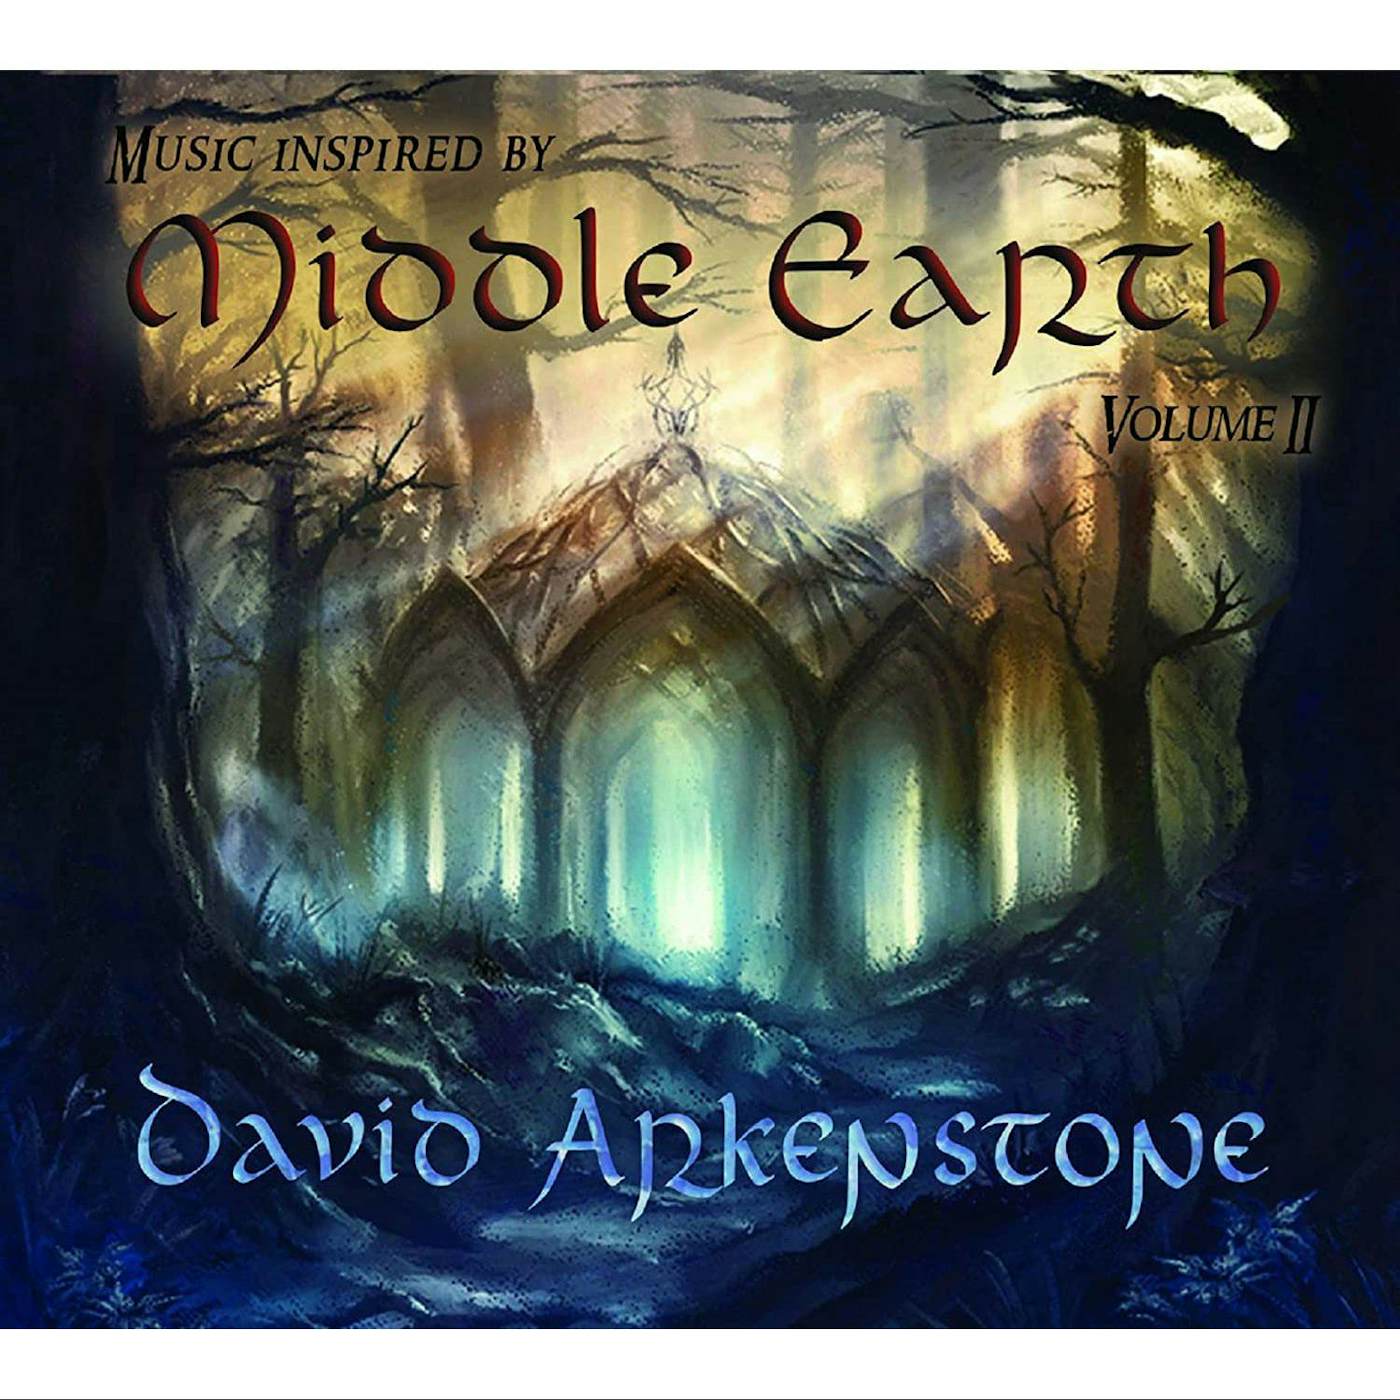 David Arkenstone Music Inspired By Middle Earth: Vol. II Vinyl Record